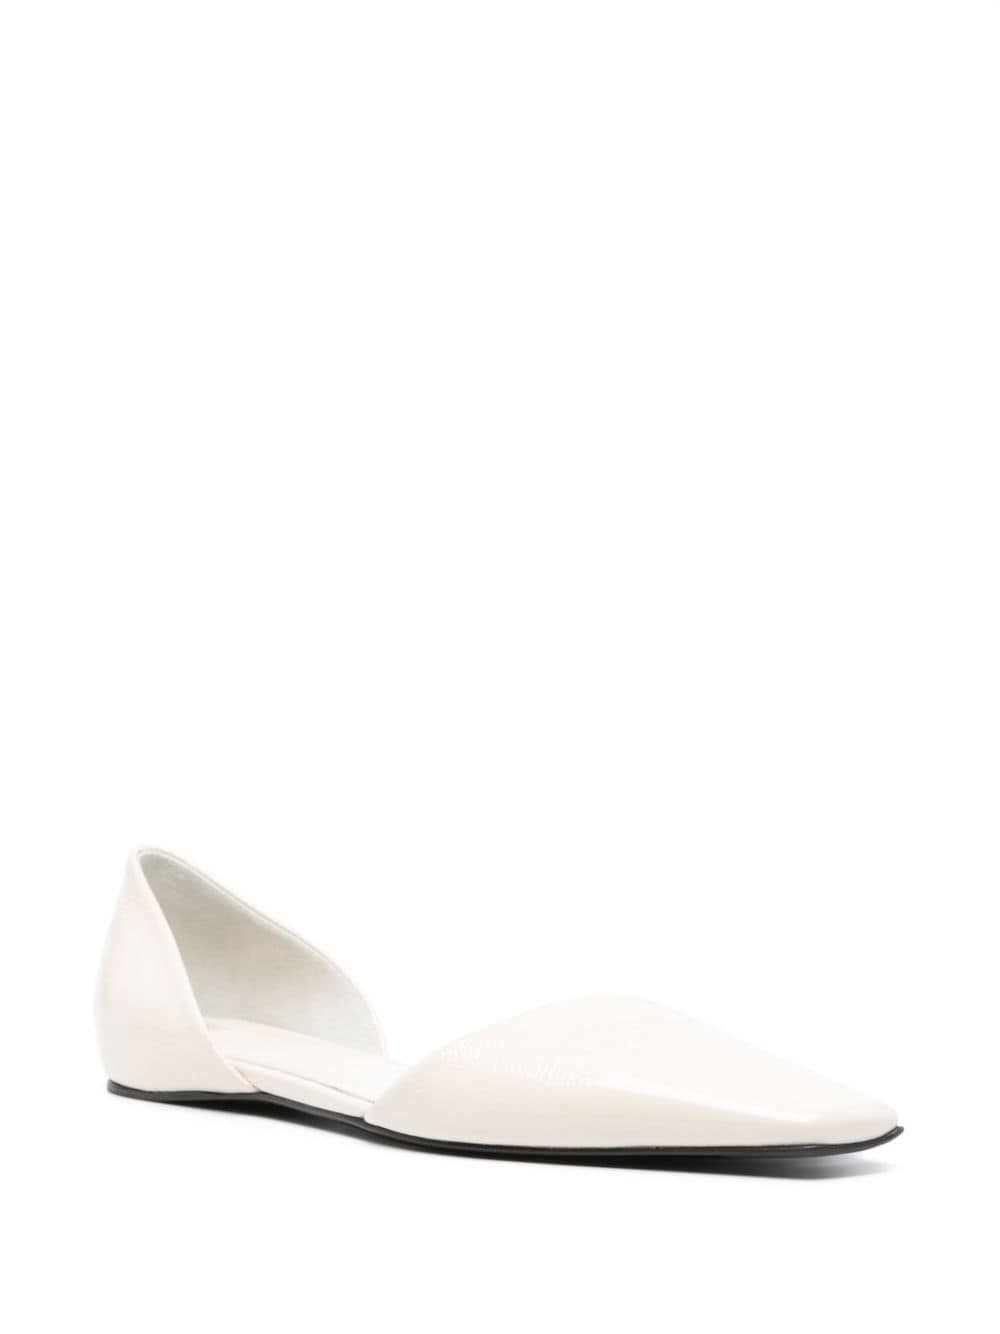 Image 2 of TOTEME The Asymmetric d'Orsay ballerina shoes